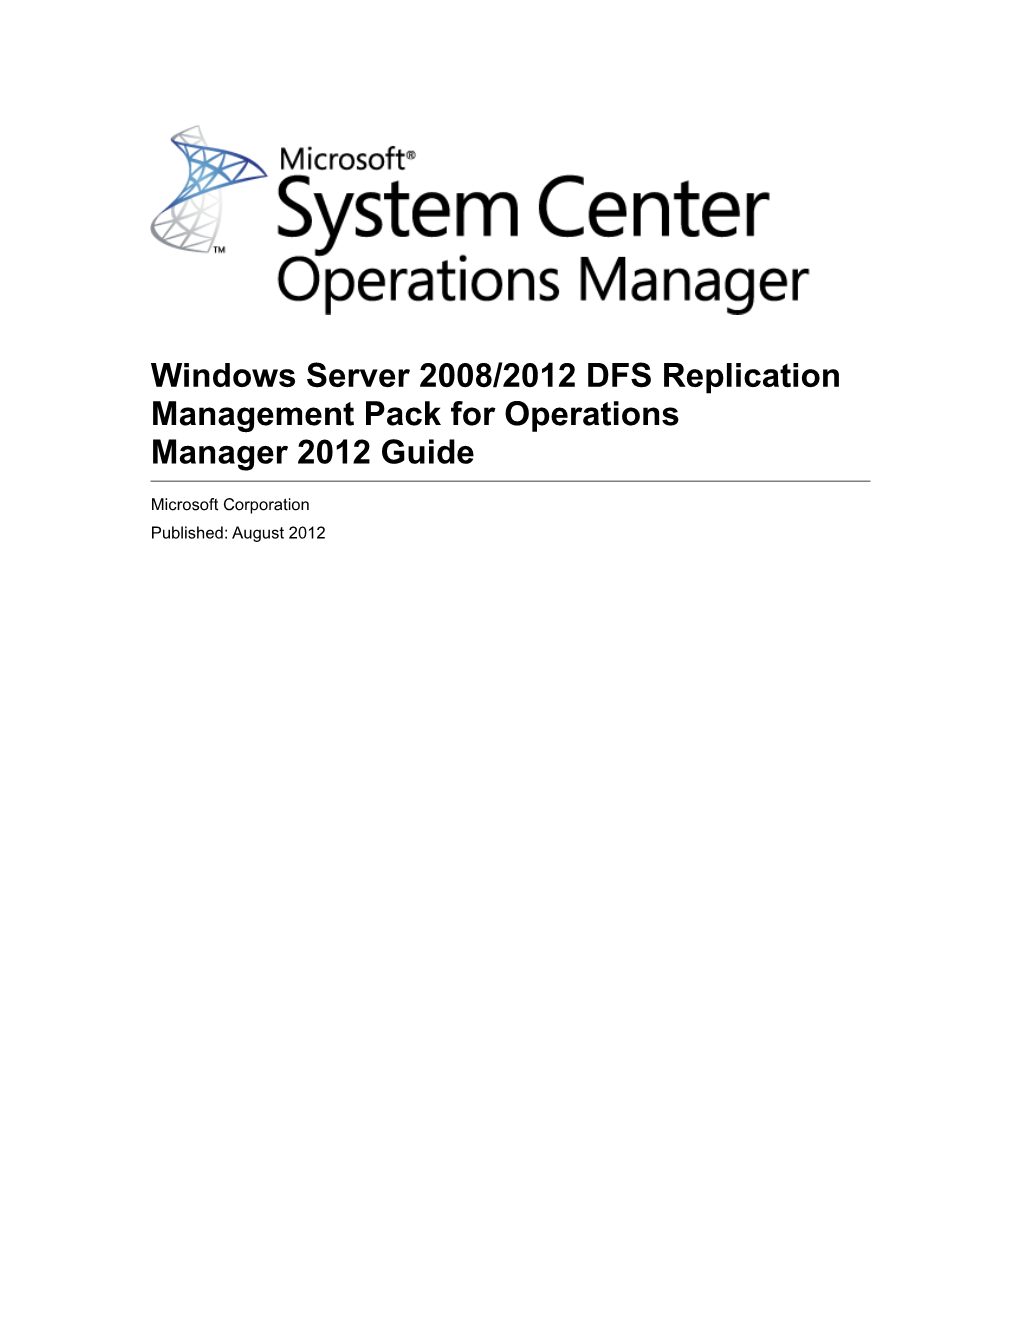 File Services Management Pack Guide for System Center Operations Manager 2007 s1